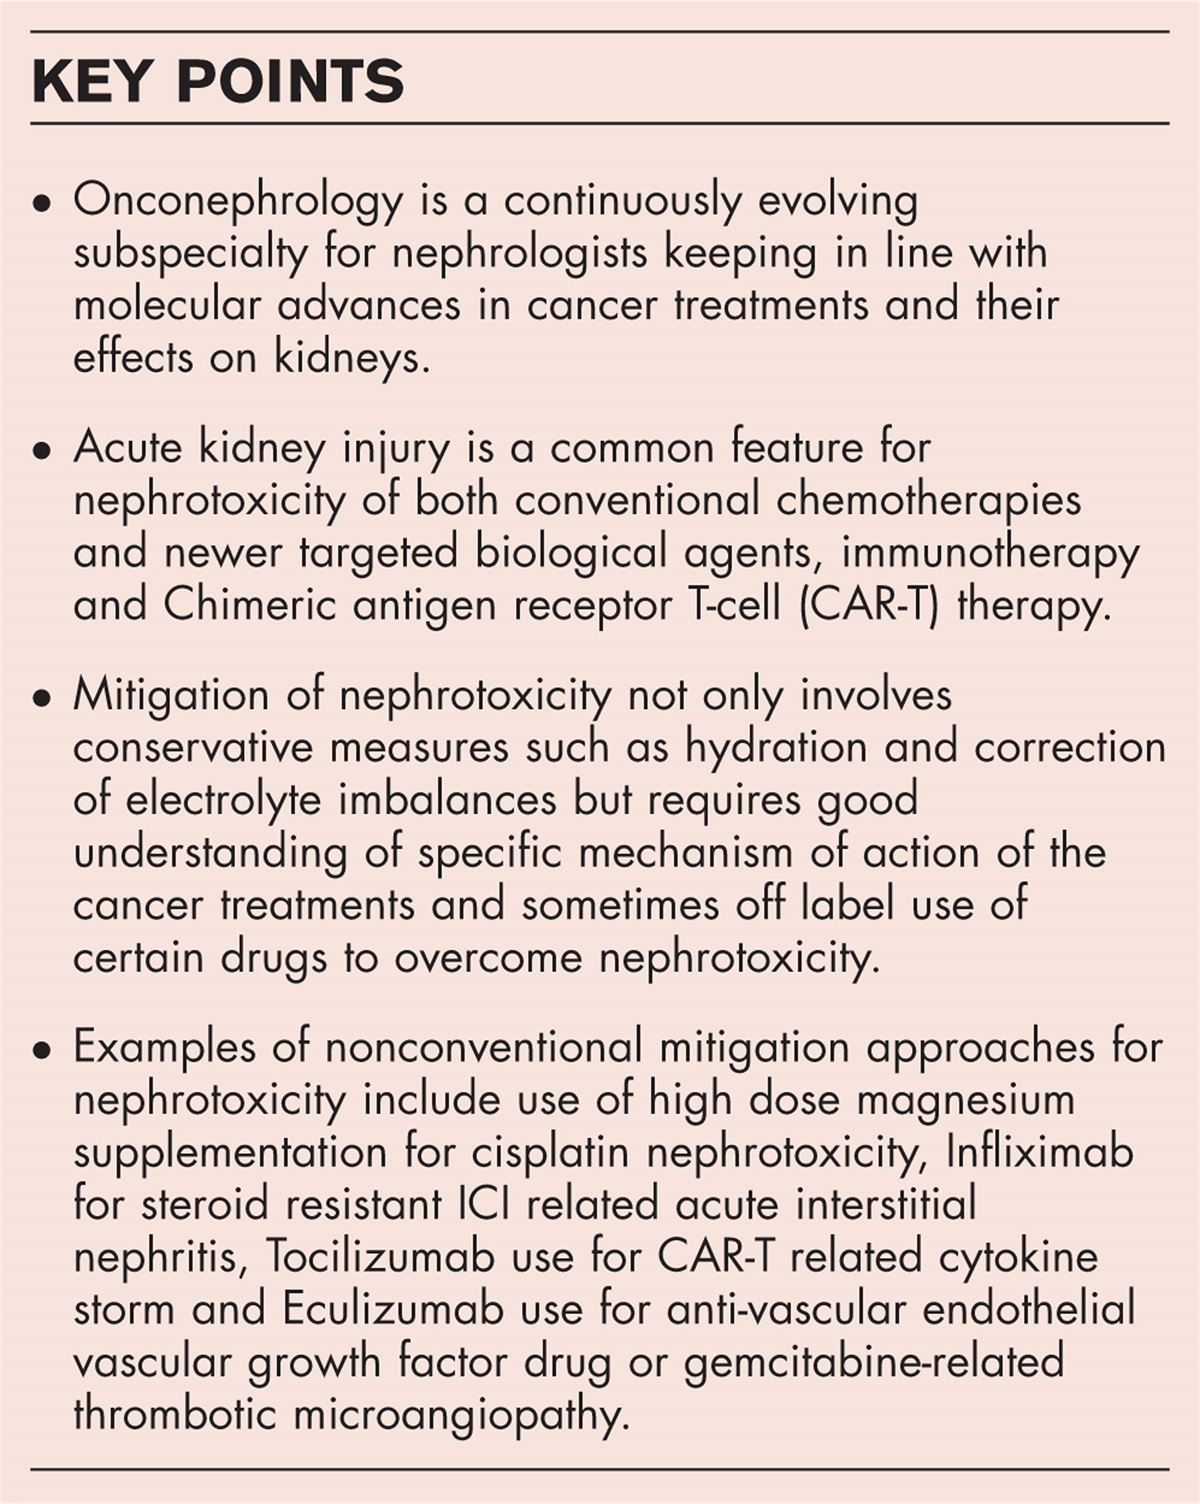 Onconephrology: mitigation of renal injury in chemotherapy administration